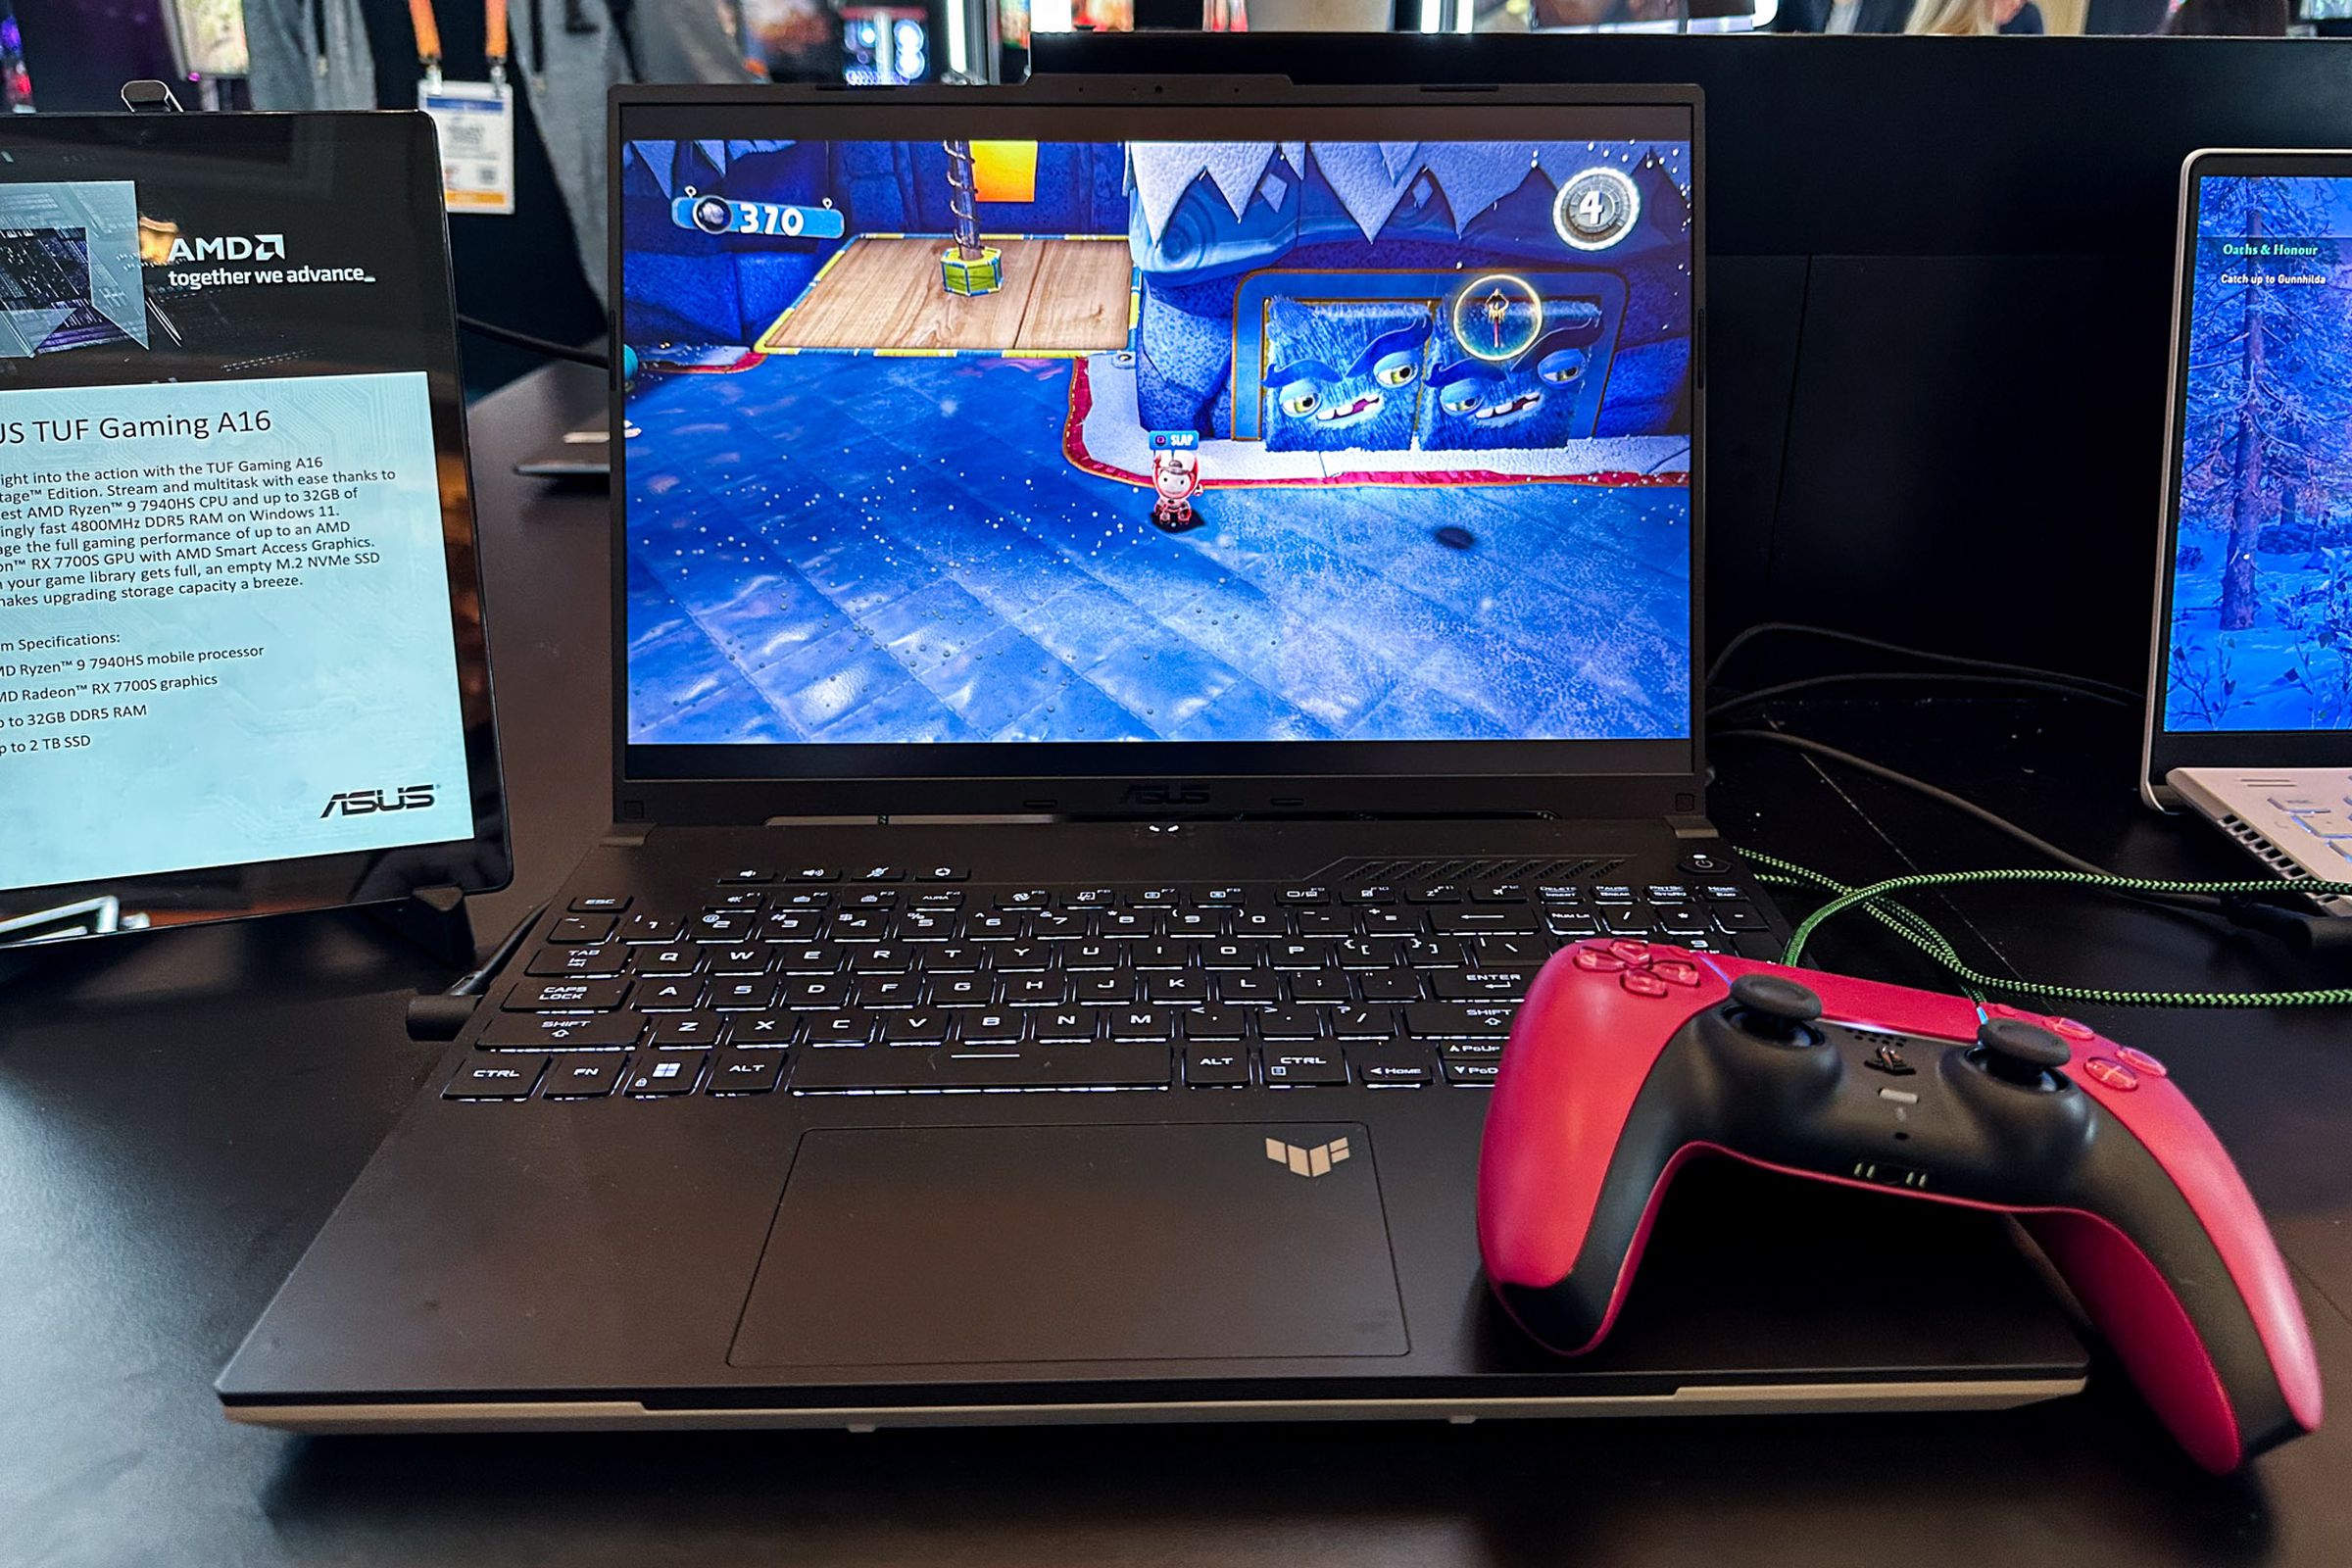 The Asus TUF Gaming A16 running Sack Boy with a red PS5 controller resting on the palm rest.